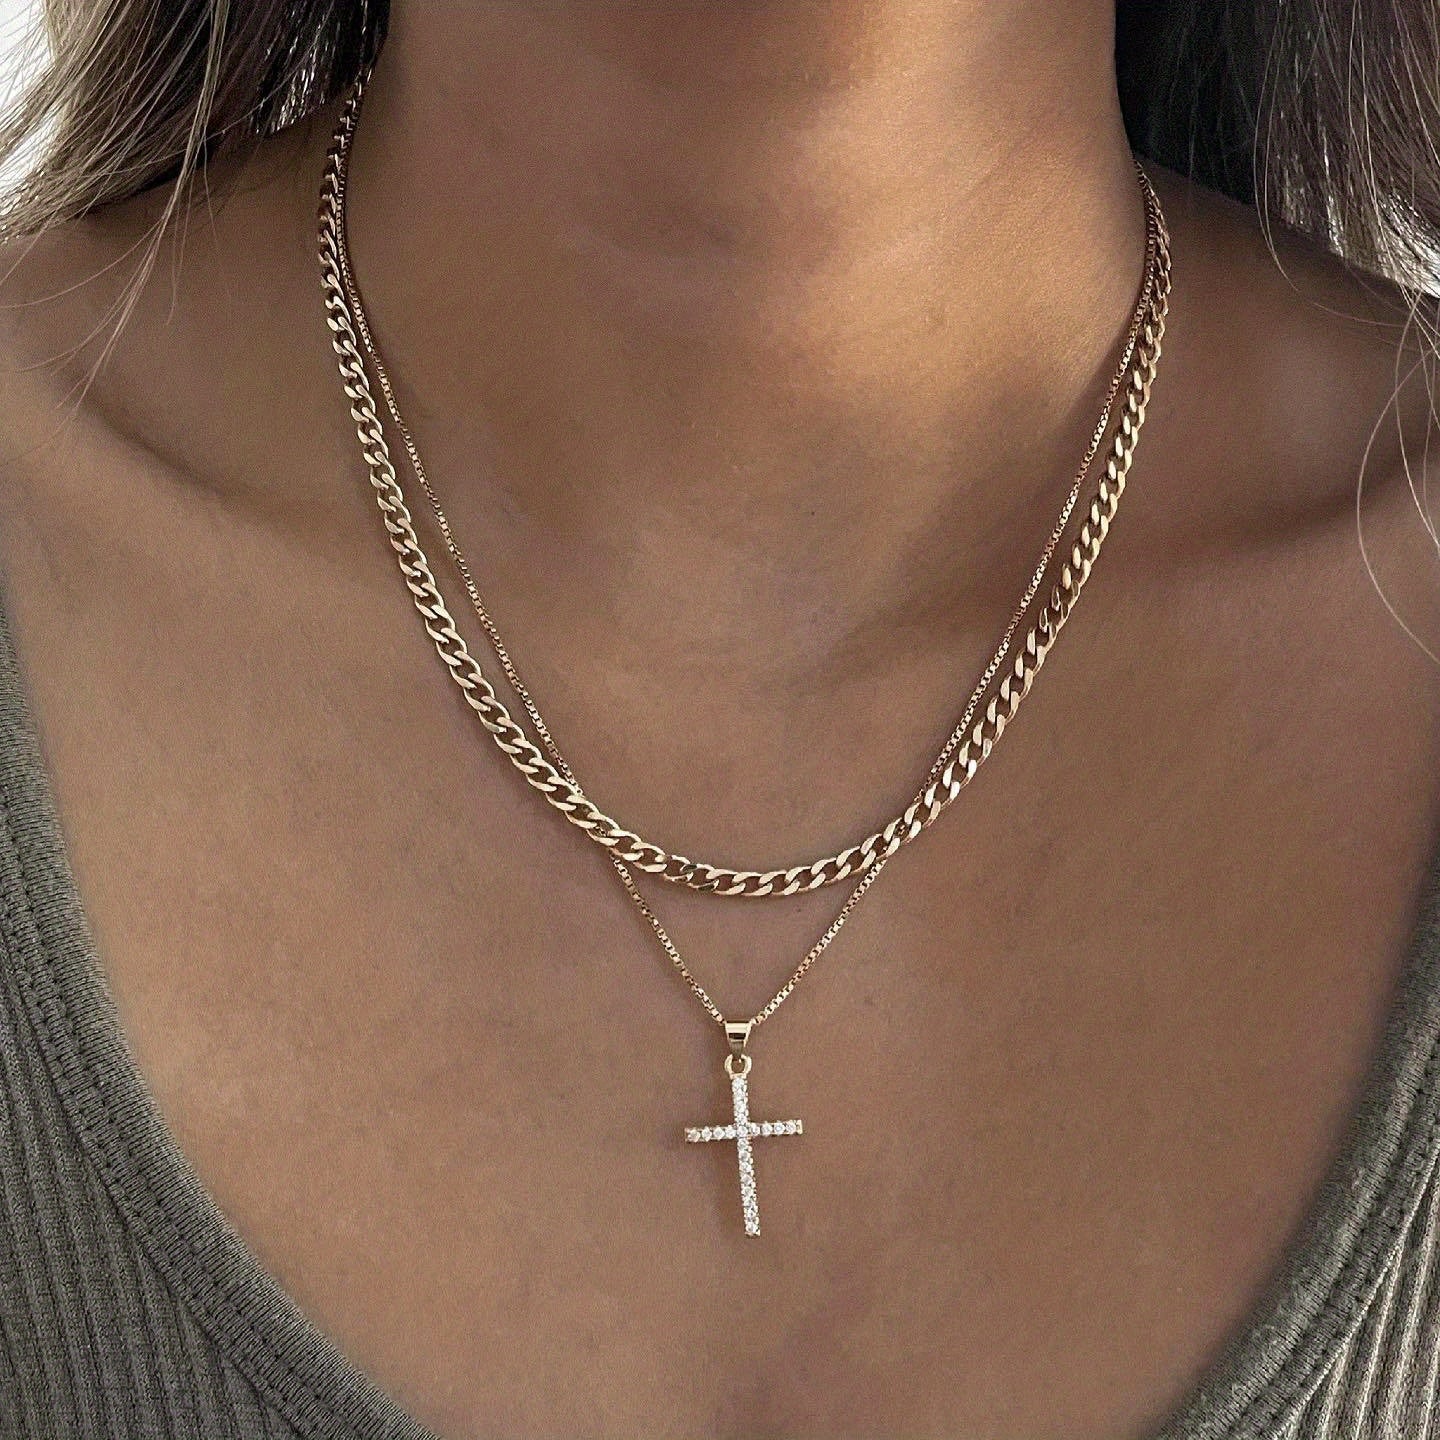 Add a Touch of Elegance with our Stackable Chain Necklace featuring a Cross Shape Pendant - Adjustable Length for Women and Girls - 1 Piece